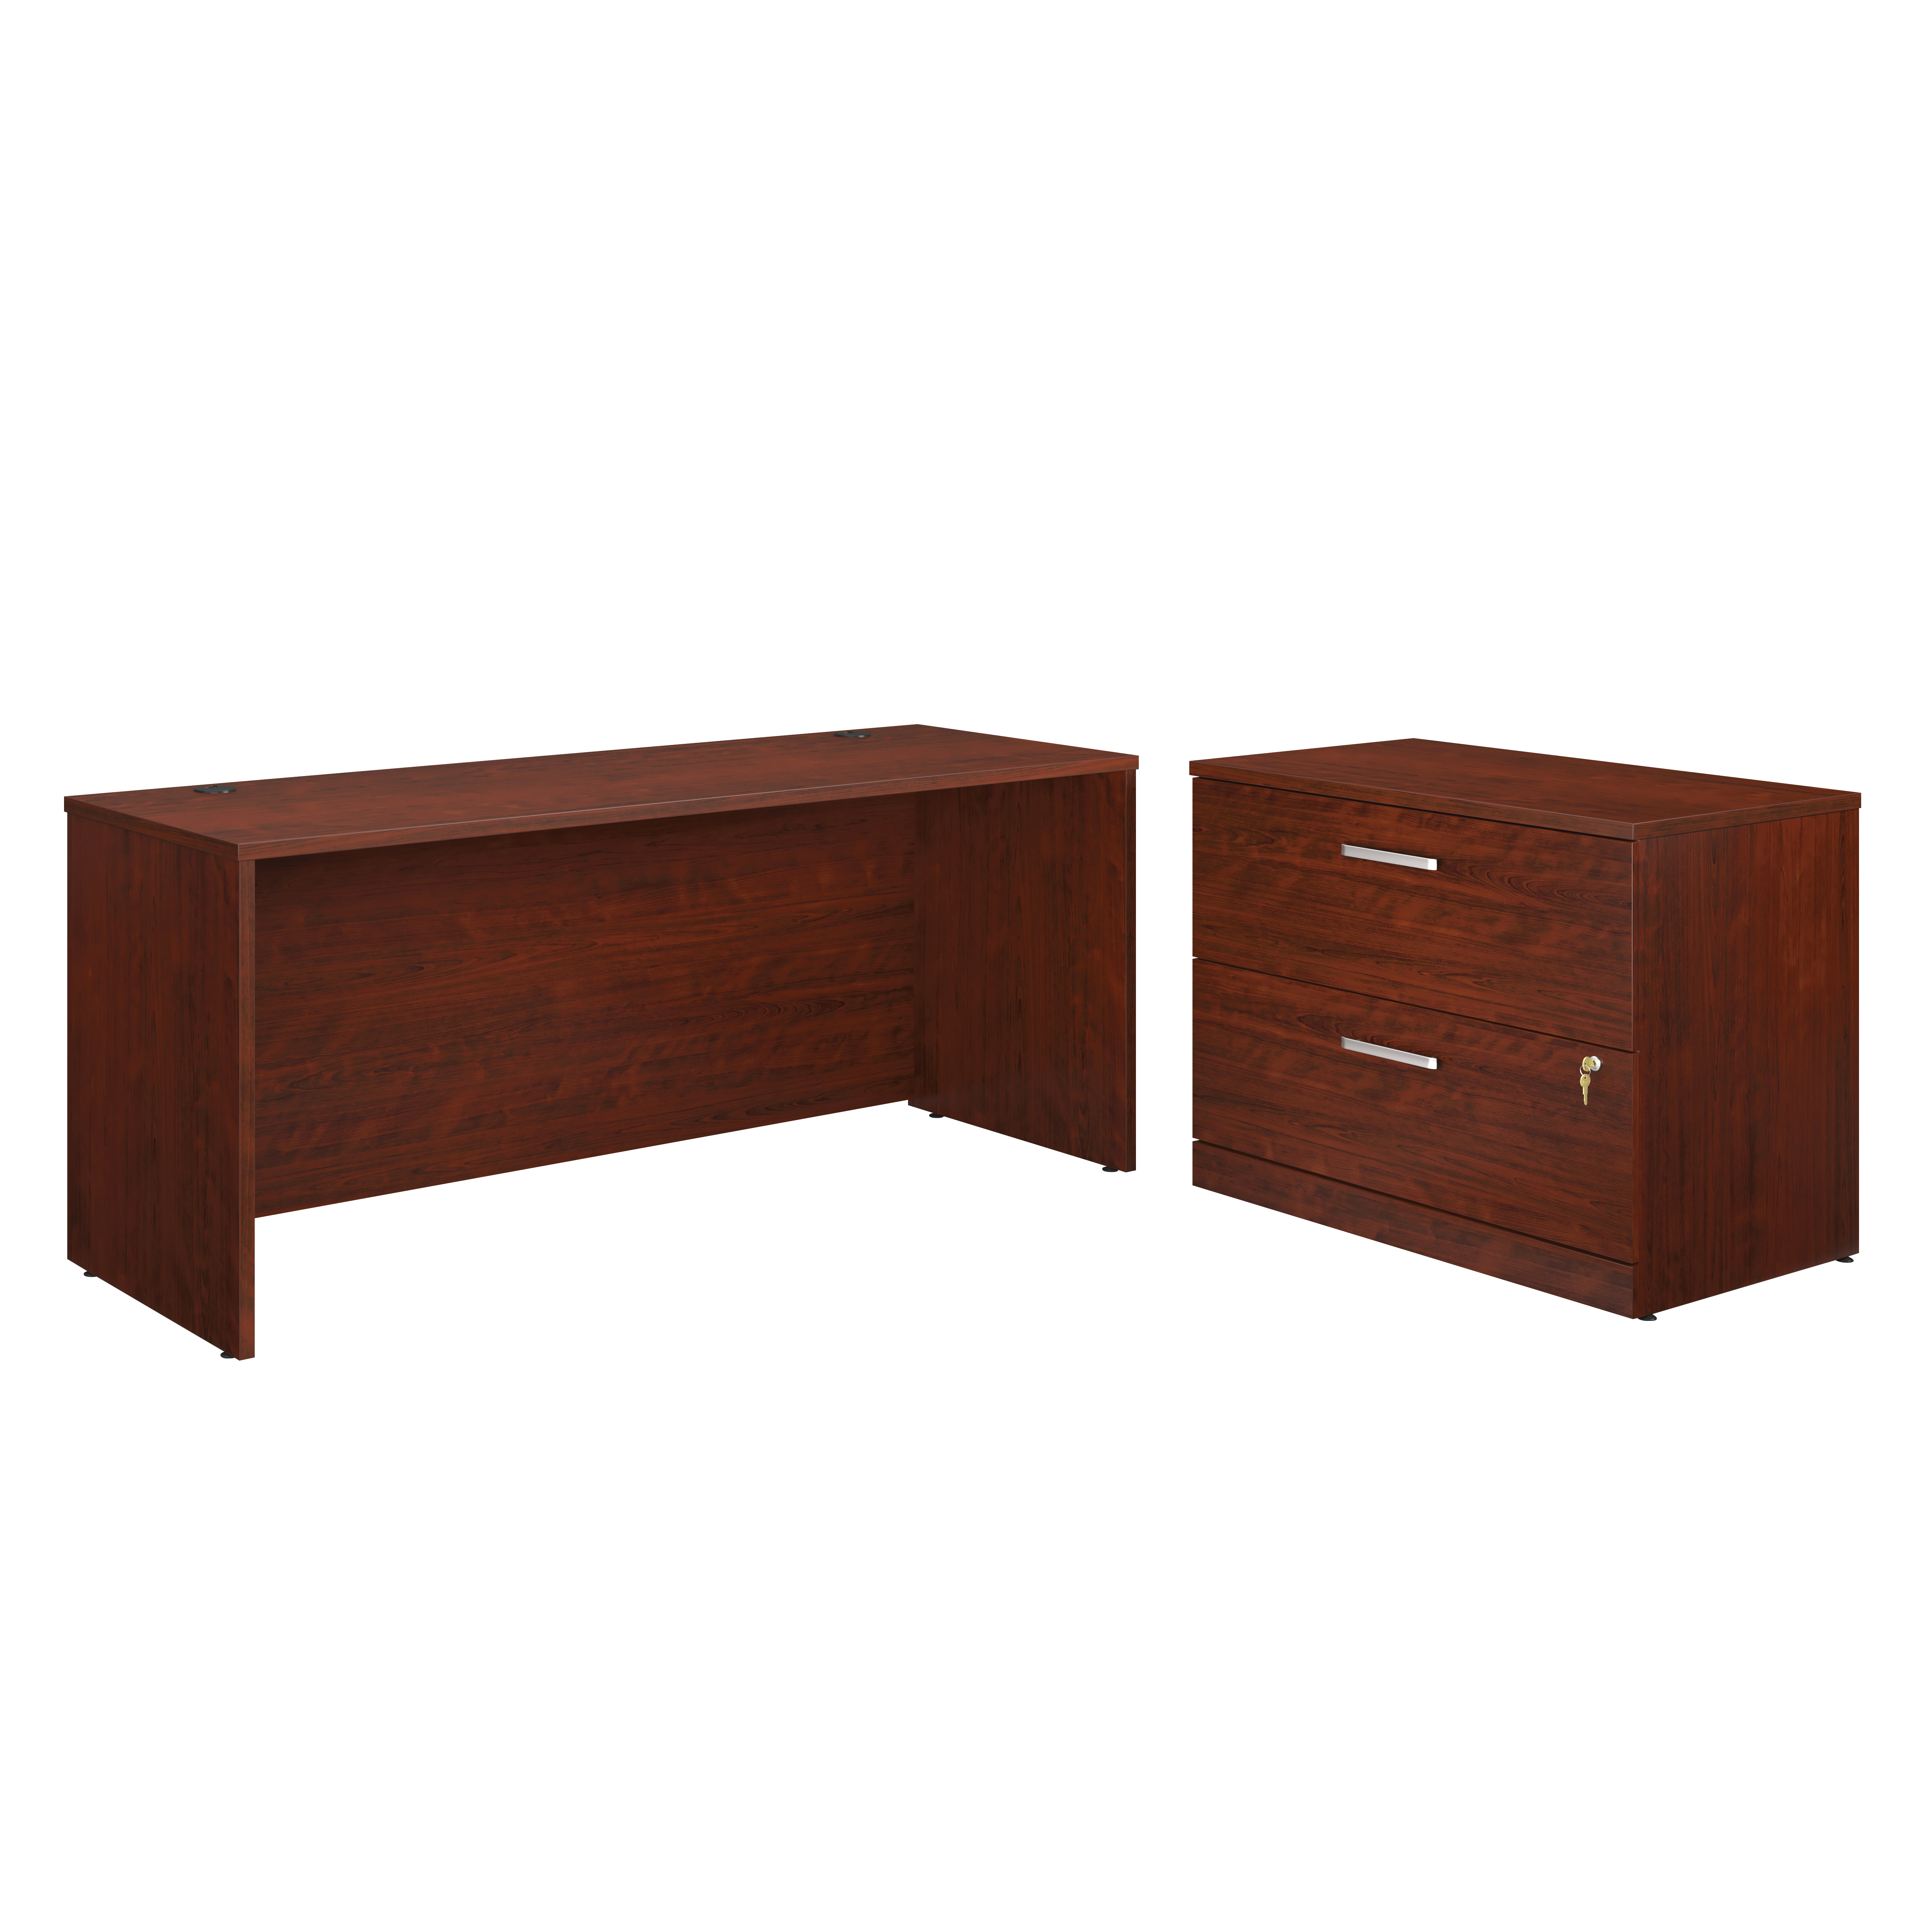 Sauder Affirm™ Commercial 72"x24" Desk with Lateral File Cabinet, Classic Cherry® finish (# 430223)